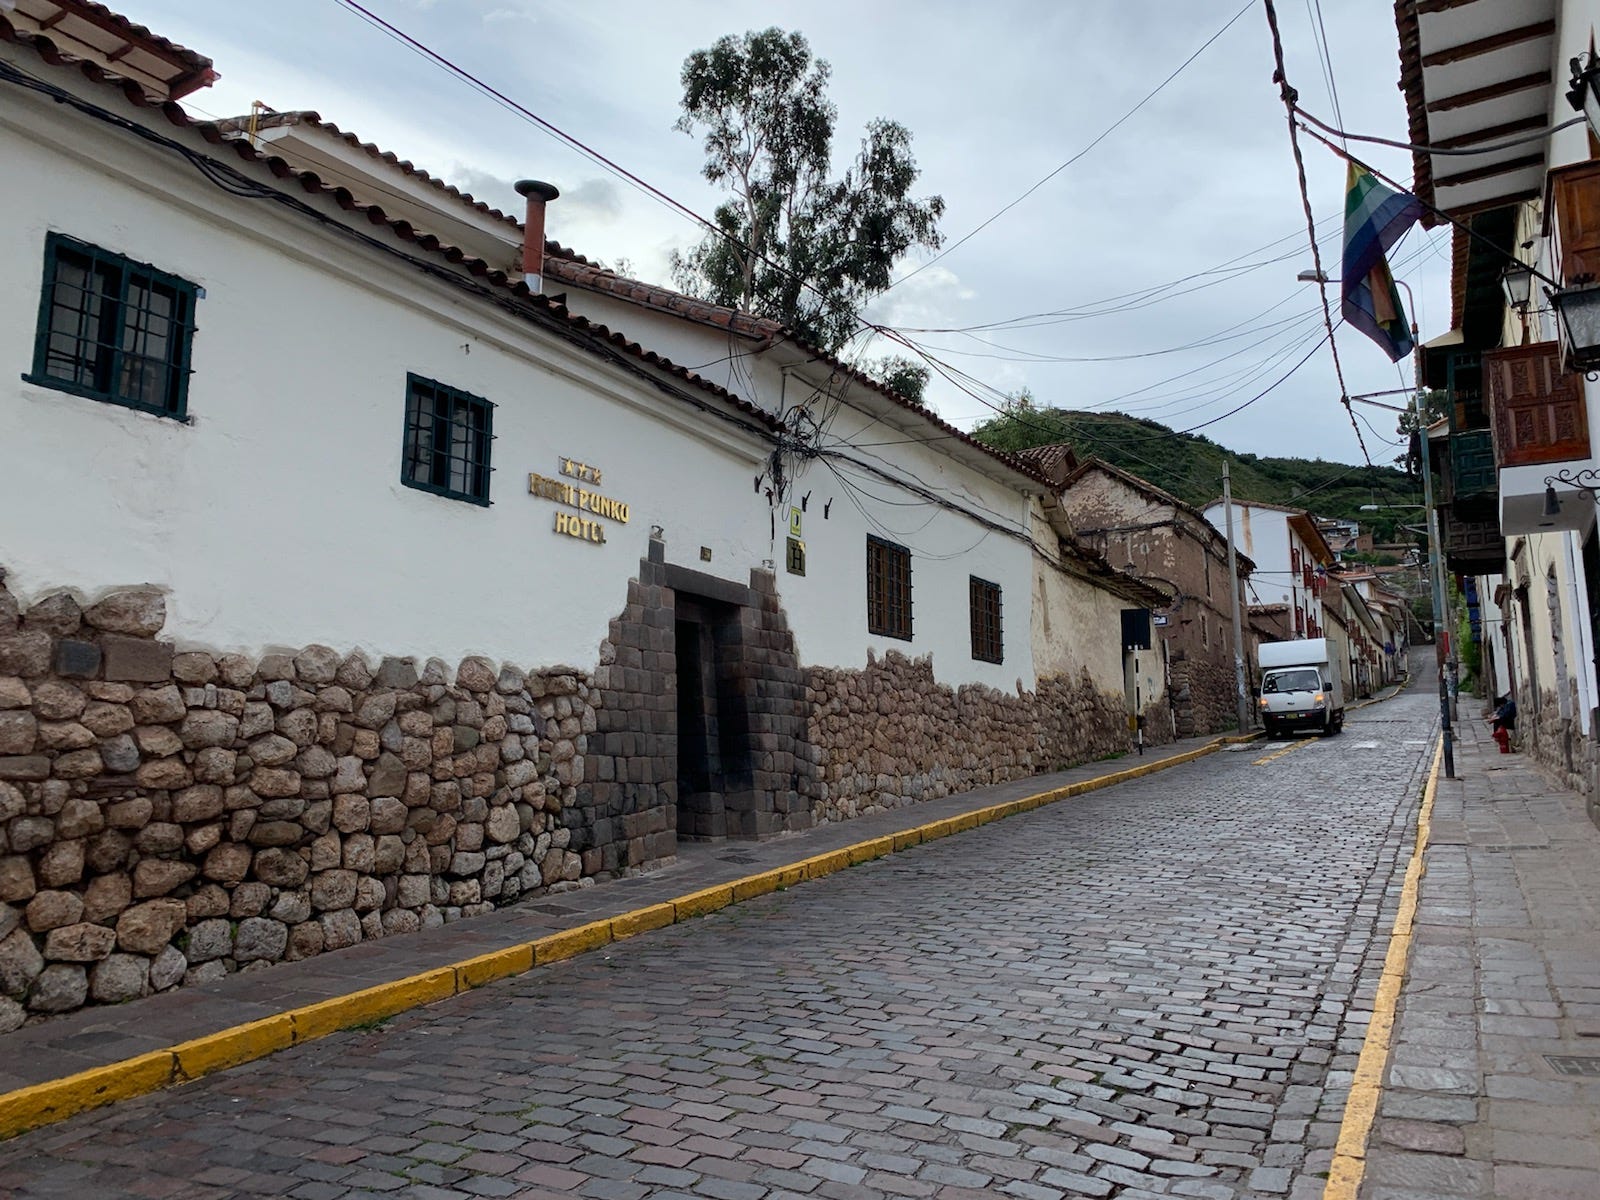 The historic city of Cusco is picturesque, with cobbles streets and cathedrals nestled among the mountains. Jonathan and Melissa Robbins, of Nashville, are staying on the pictured street in a hotel room with an en-suite kitchen that allows them to cook at home.